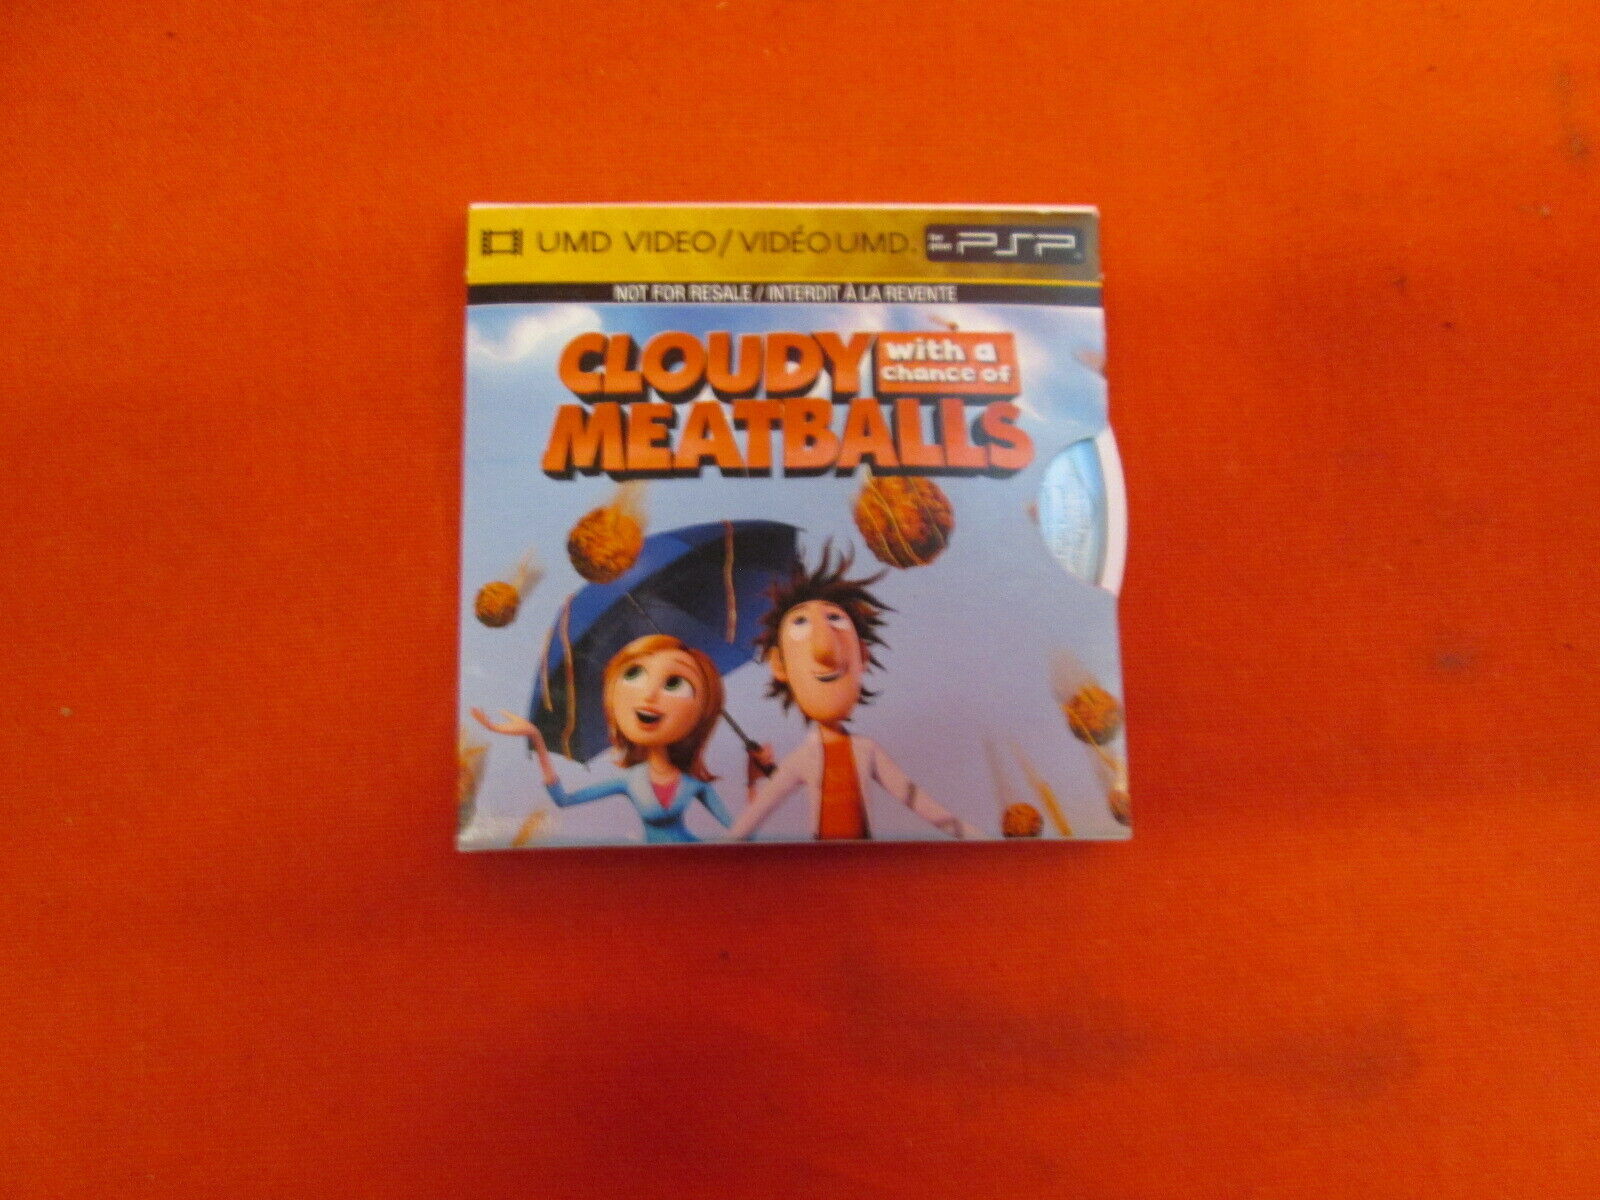 Cloudy With a Chance of Meatballs   -    Playstation PSP   umd 